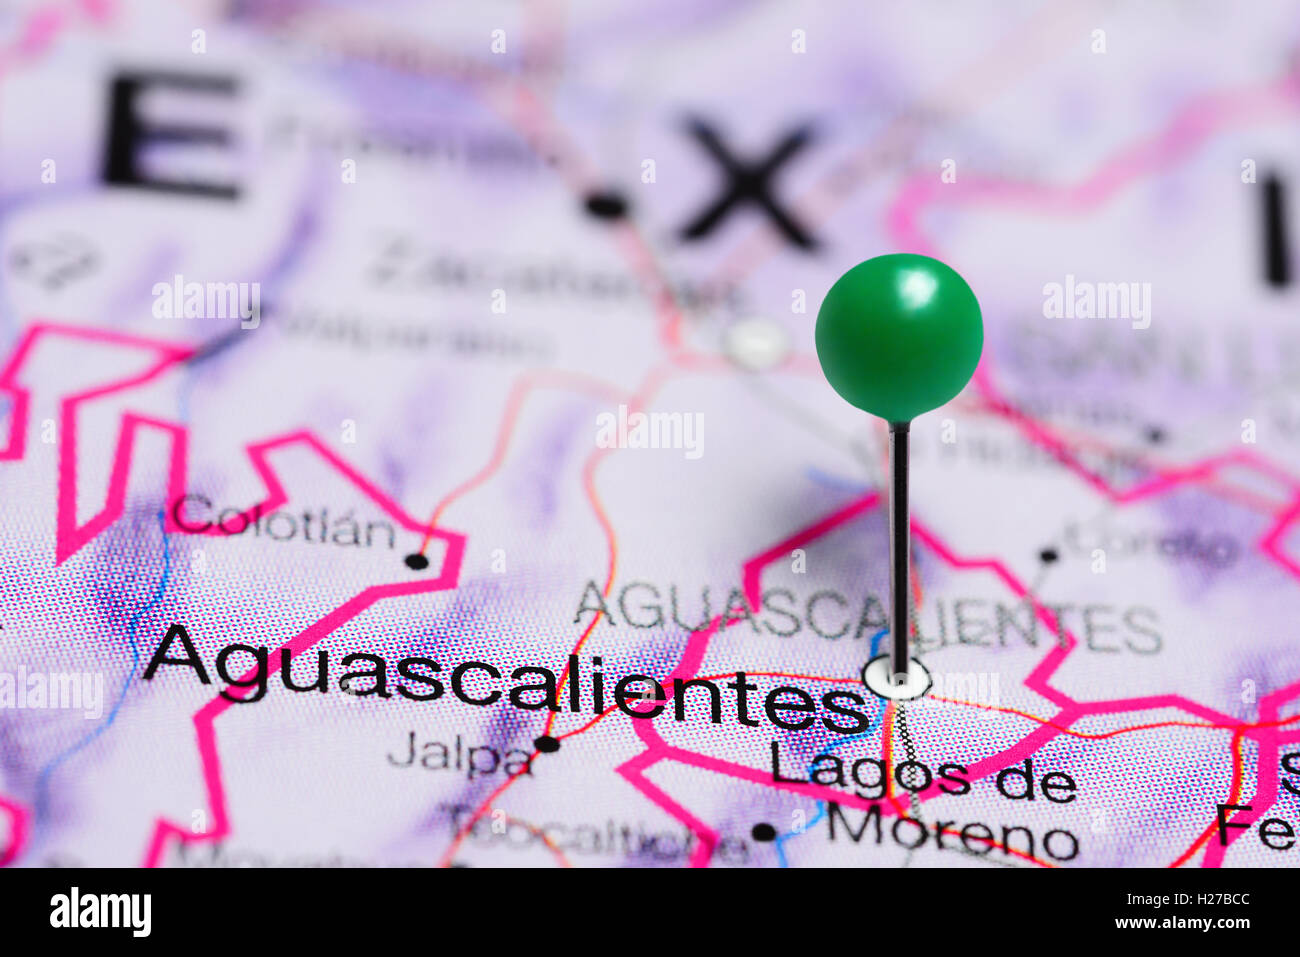 Aguascalientes pinned on a map of Mexico Stock Photo